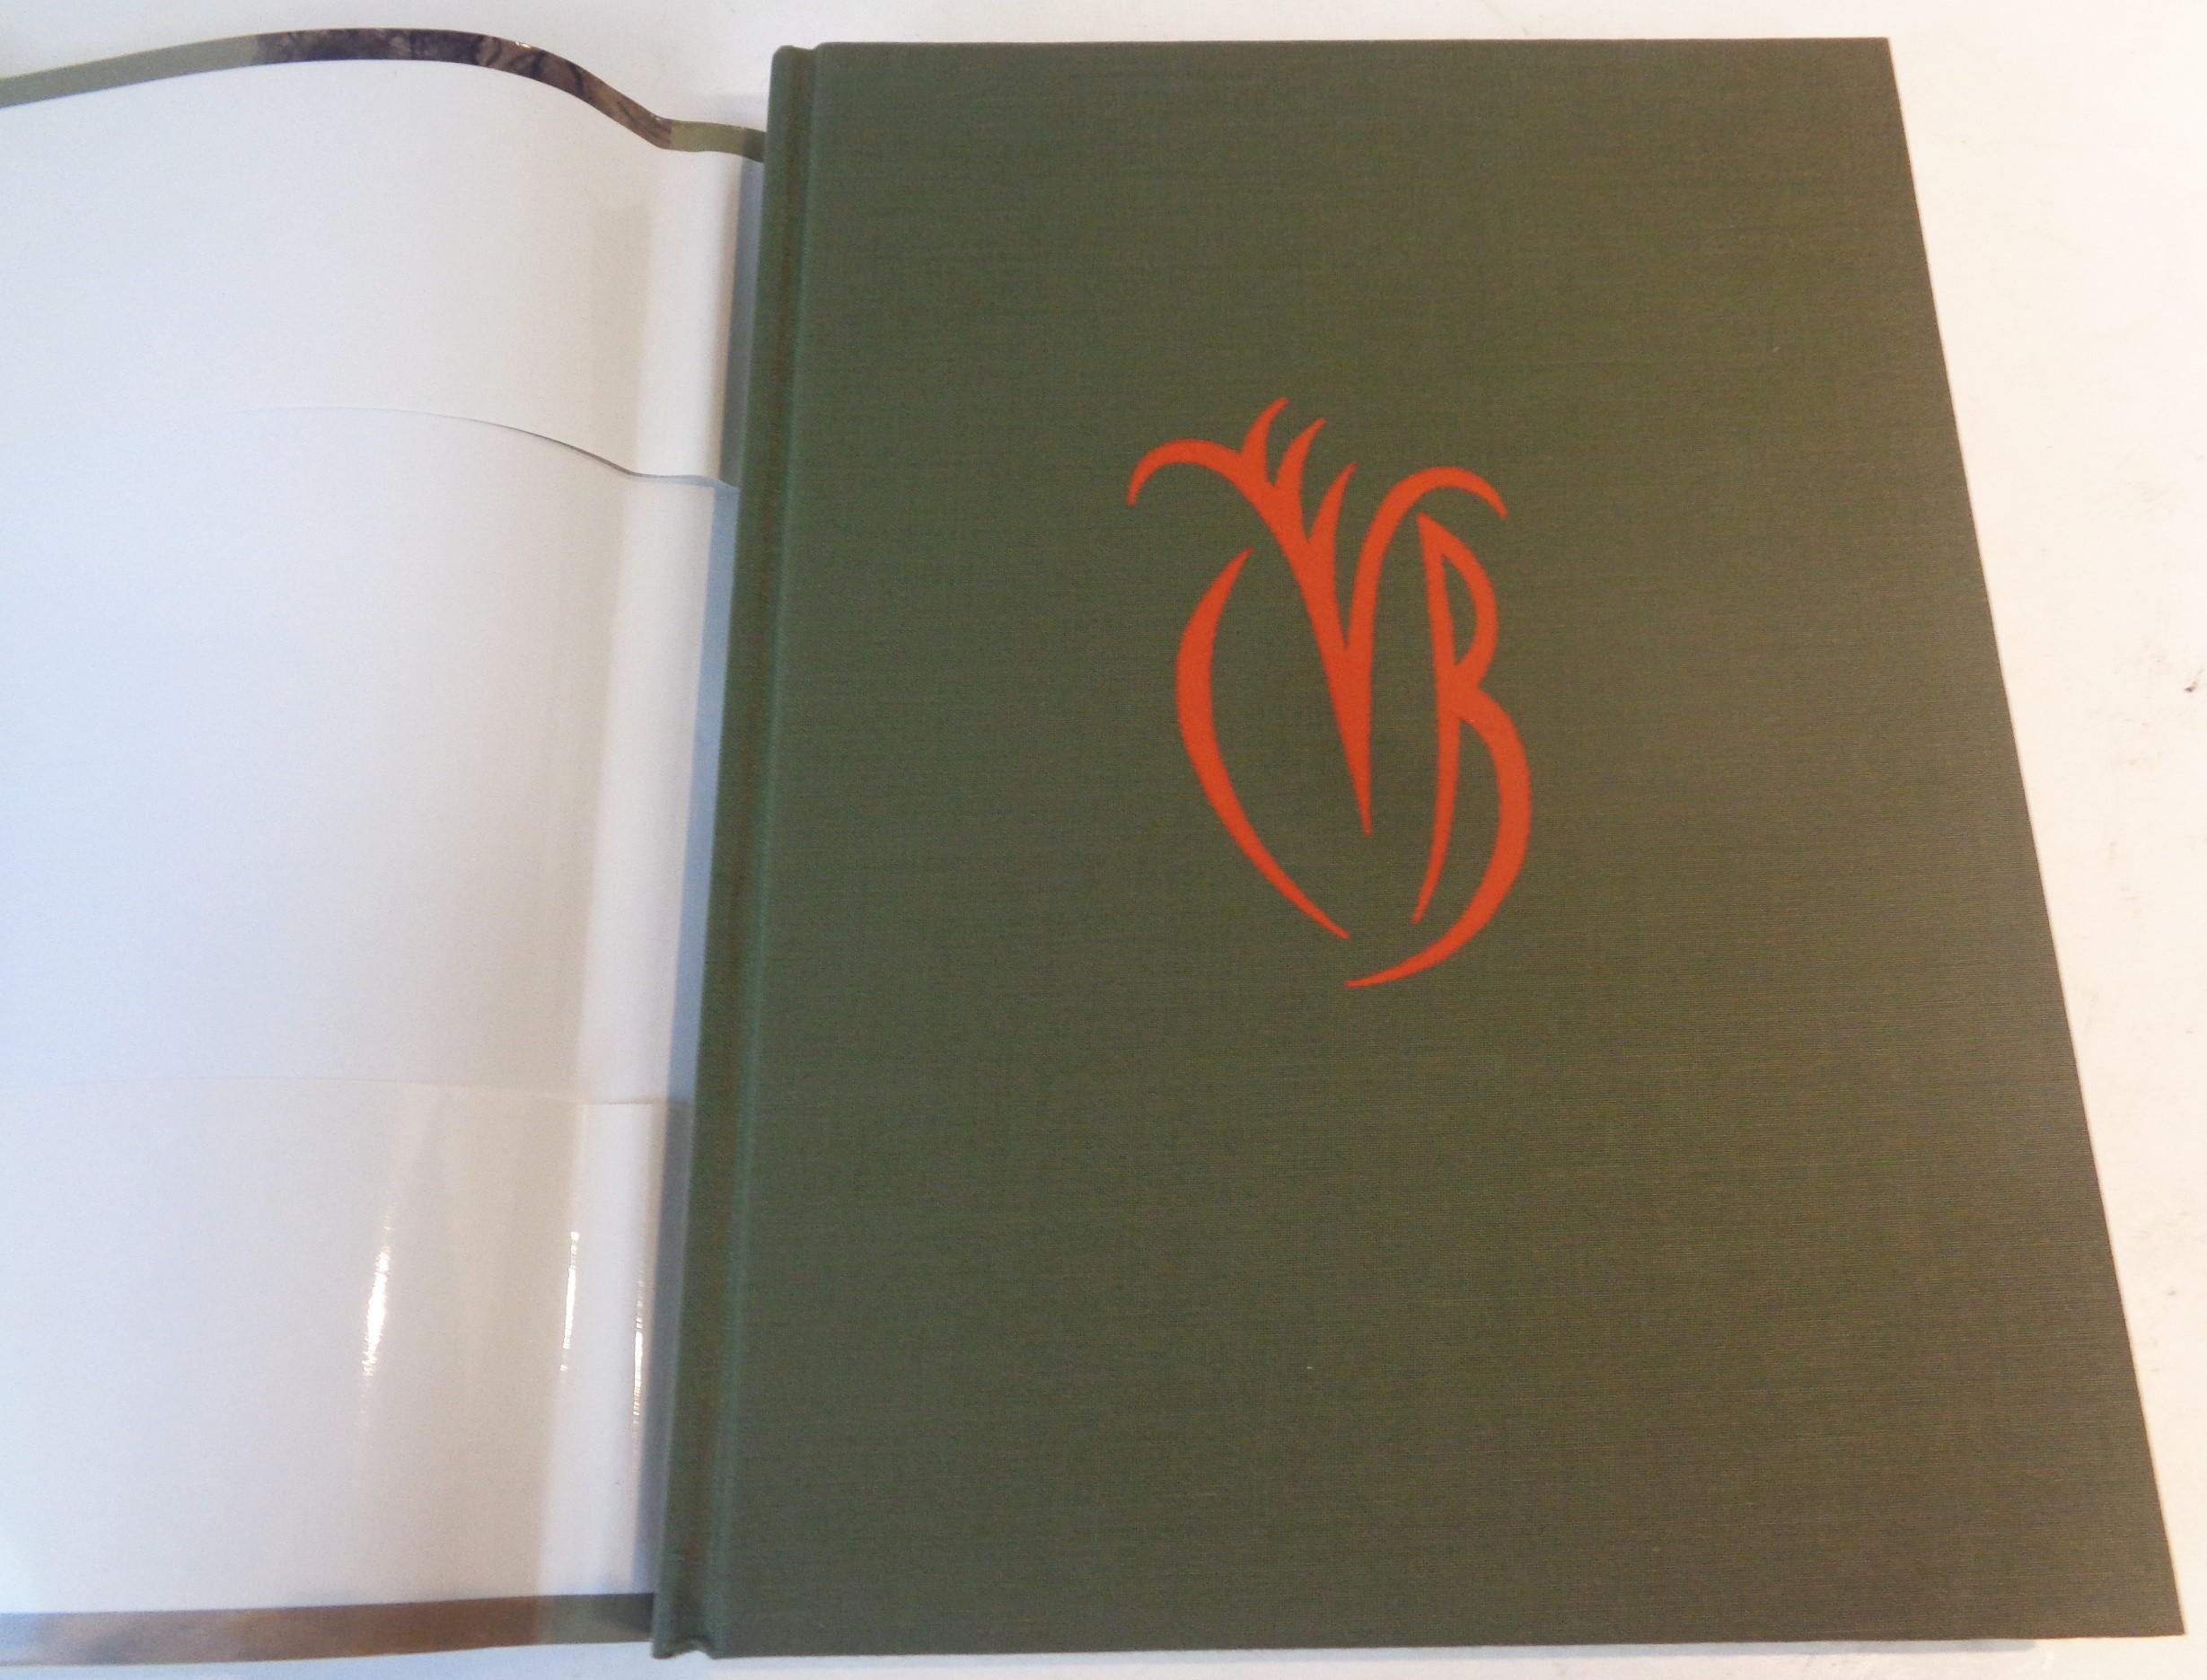 The Paintings of Charles Burchfield - North by Midwest - monogrammed hard cover green cloth book w/ dust jacket. Published by Harry N. Abrams in Assocciation w/ the Columbus Museum of Art. 1997 - 1st Edition. 778 pages / 255 illustrations (